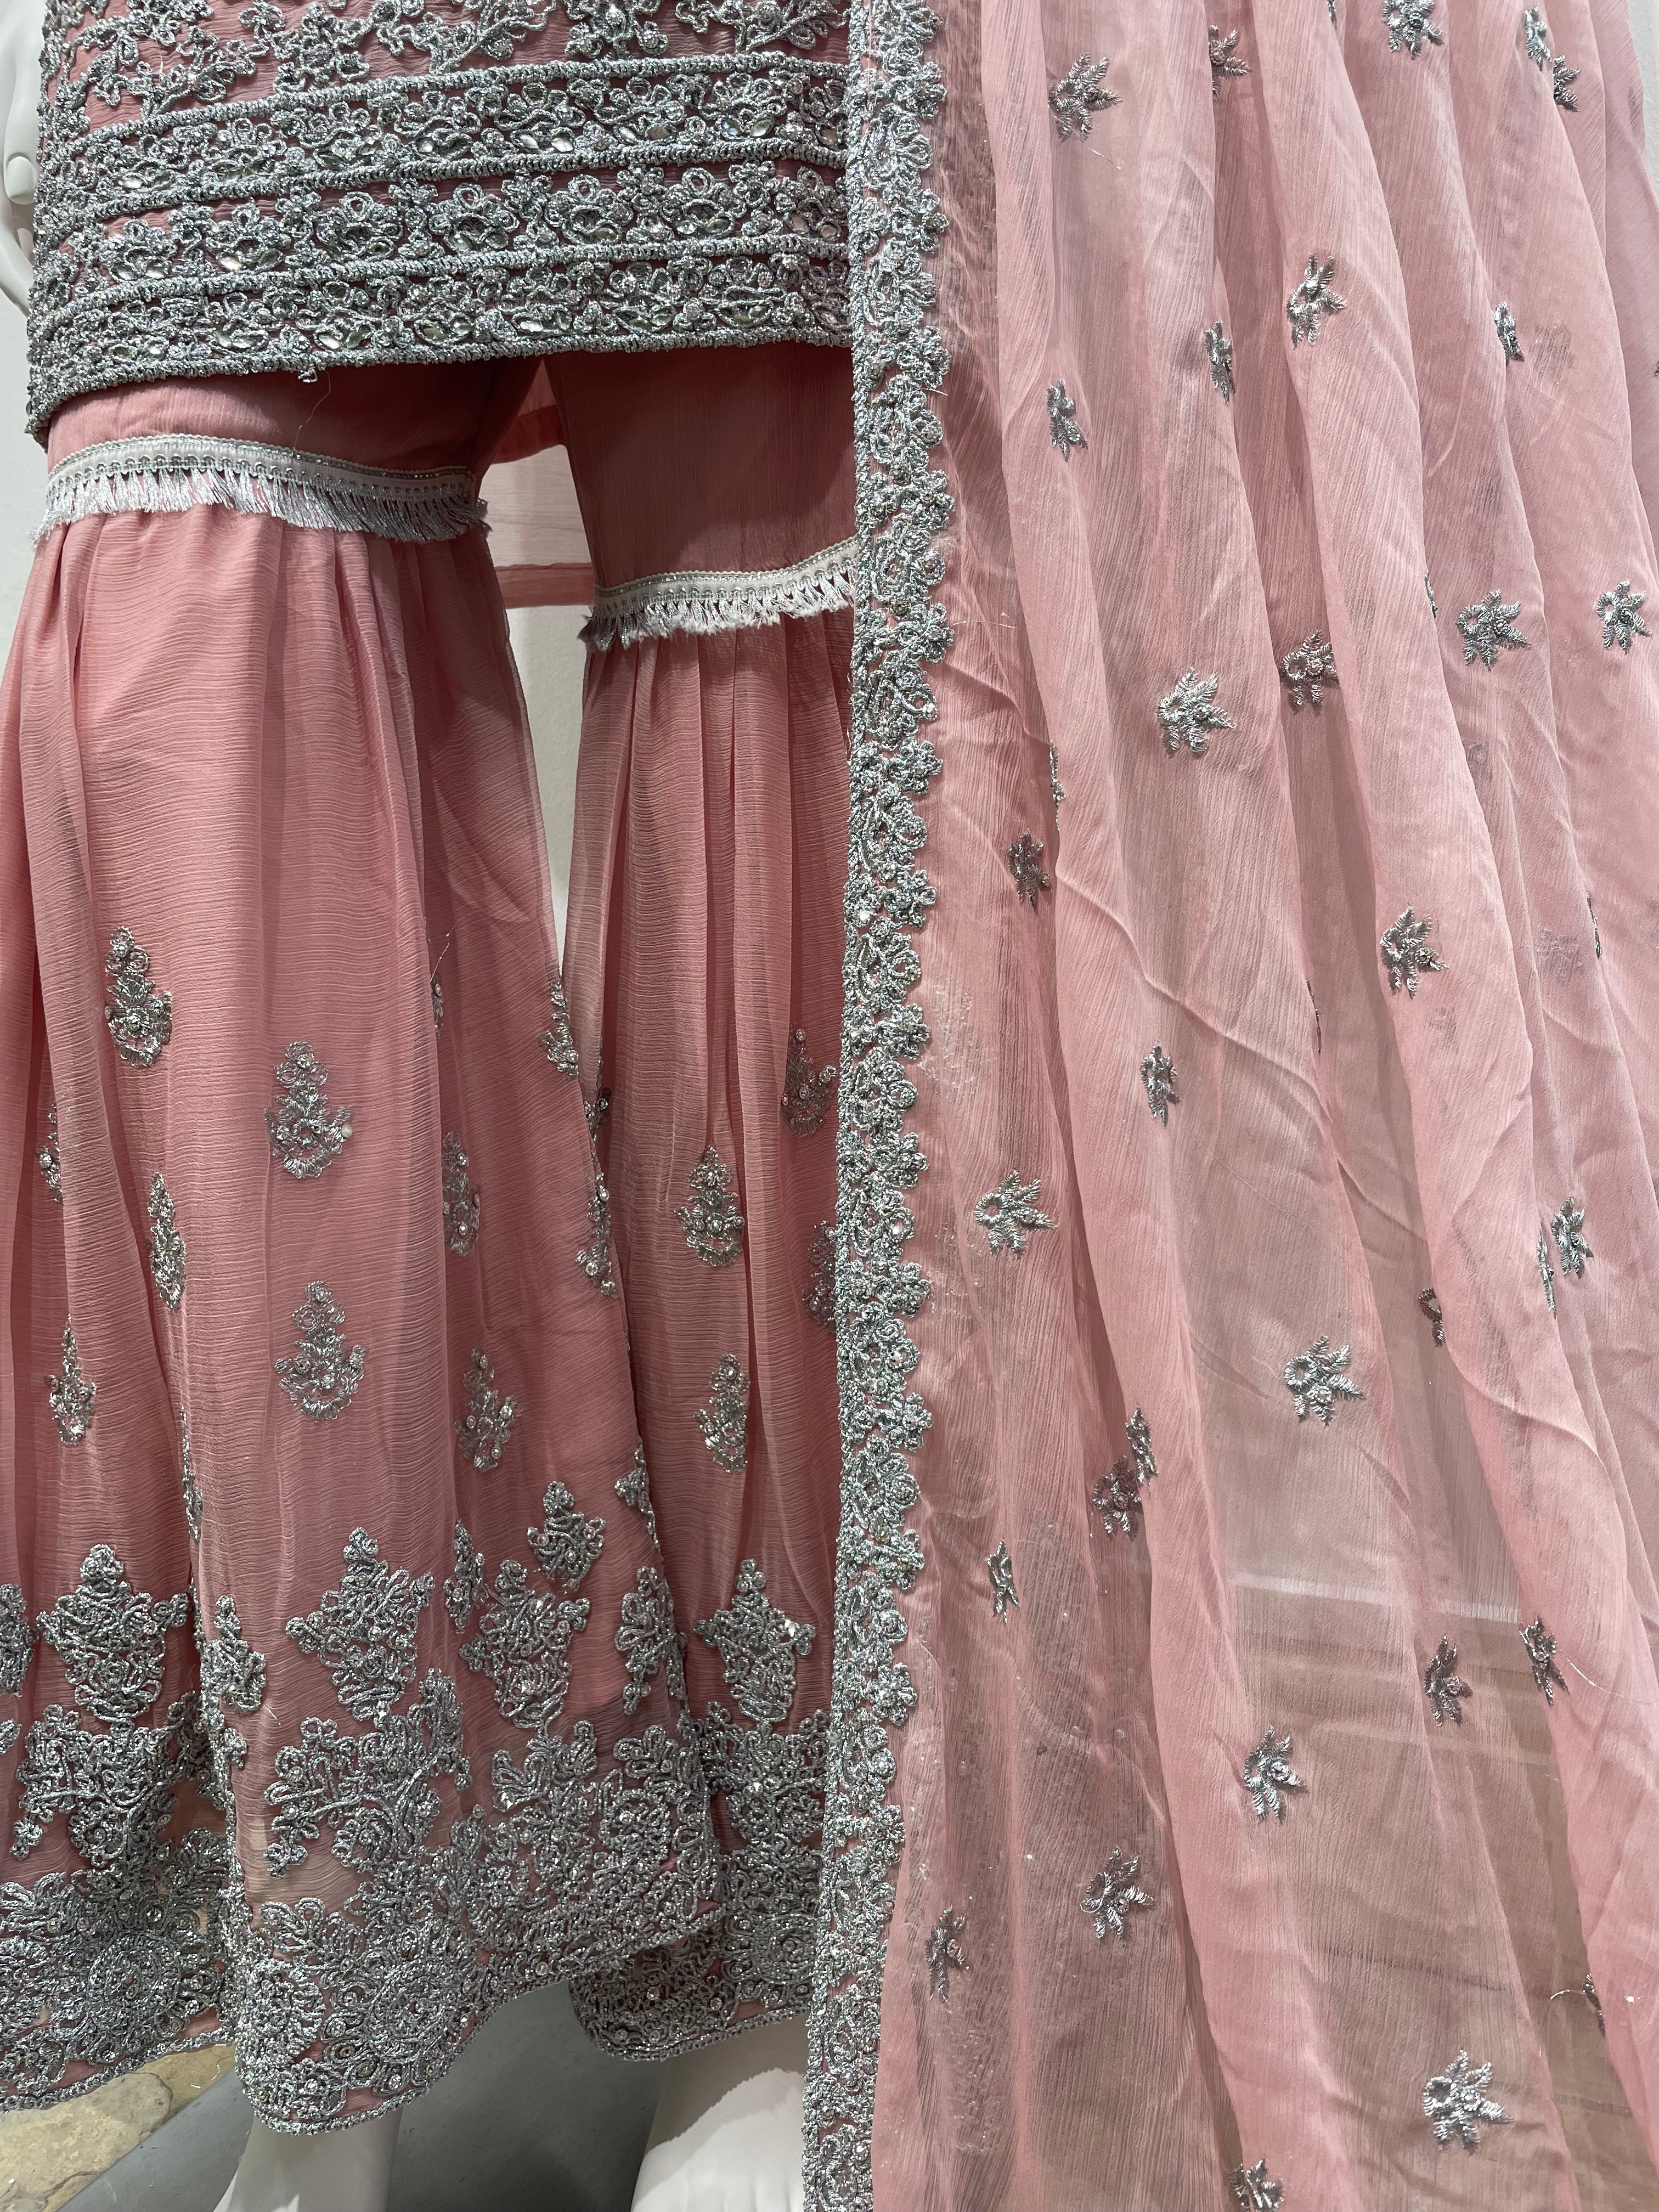 Pink Chiffon Shararah with silver embroidered work